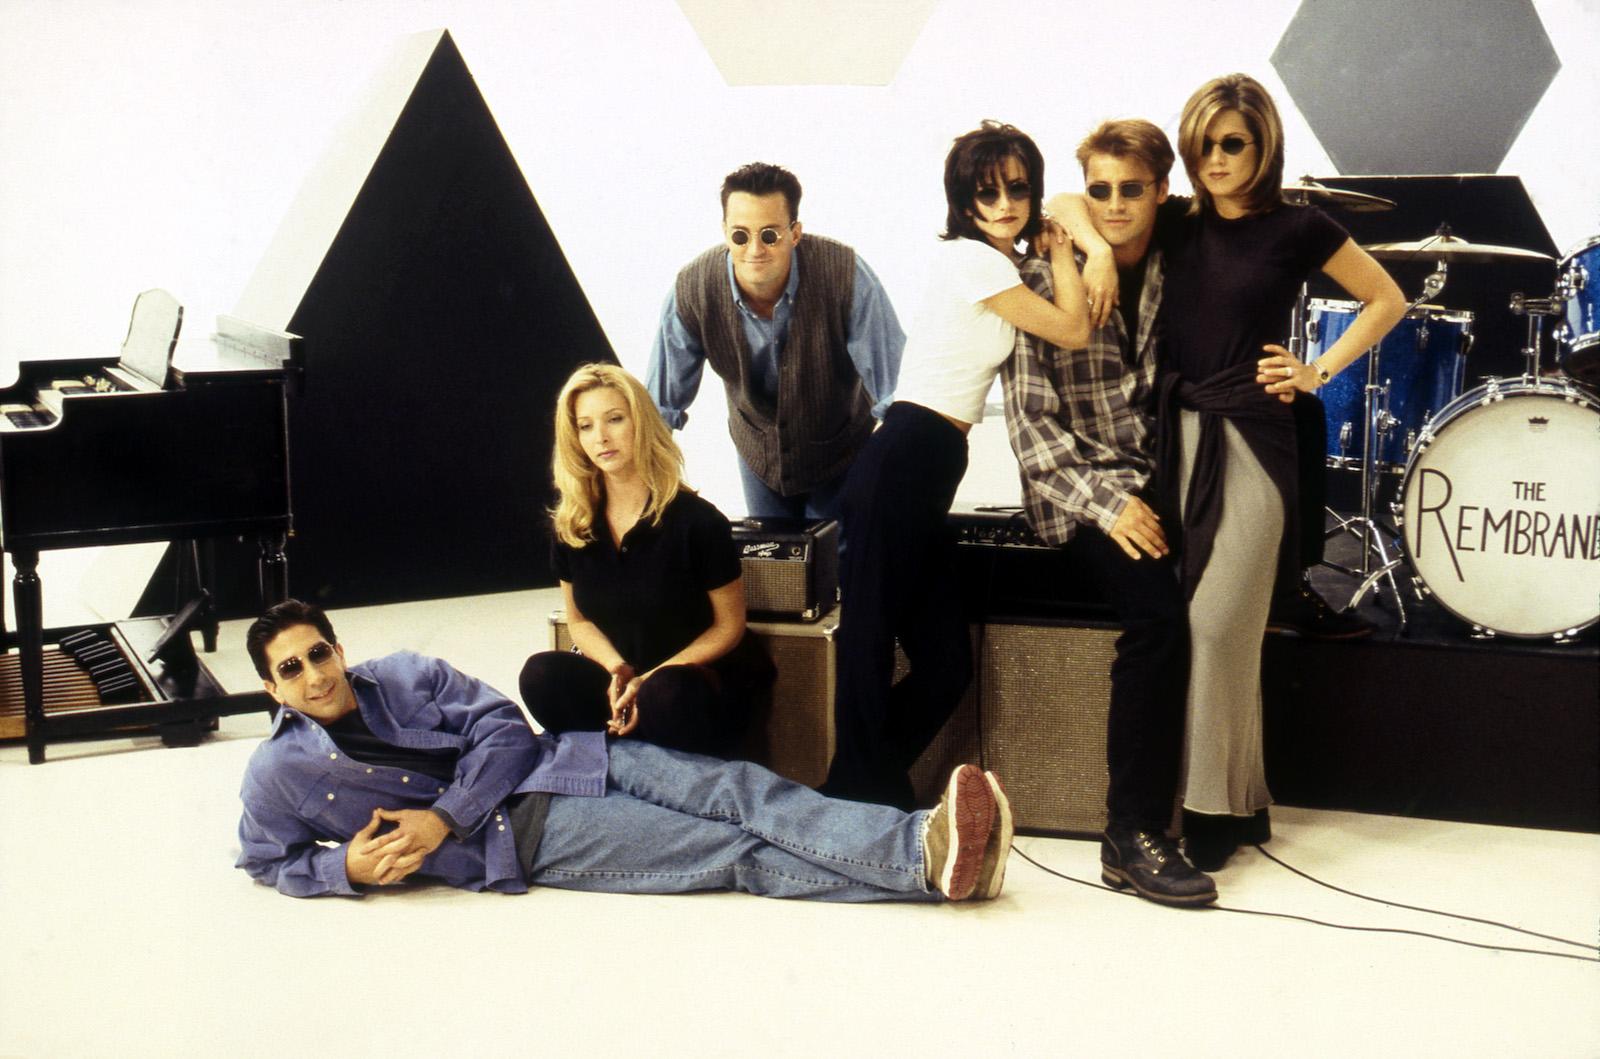 The 1994 cast of the hit show